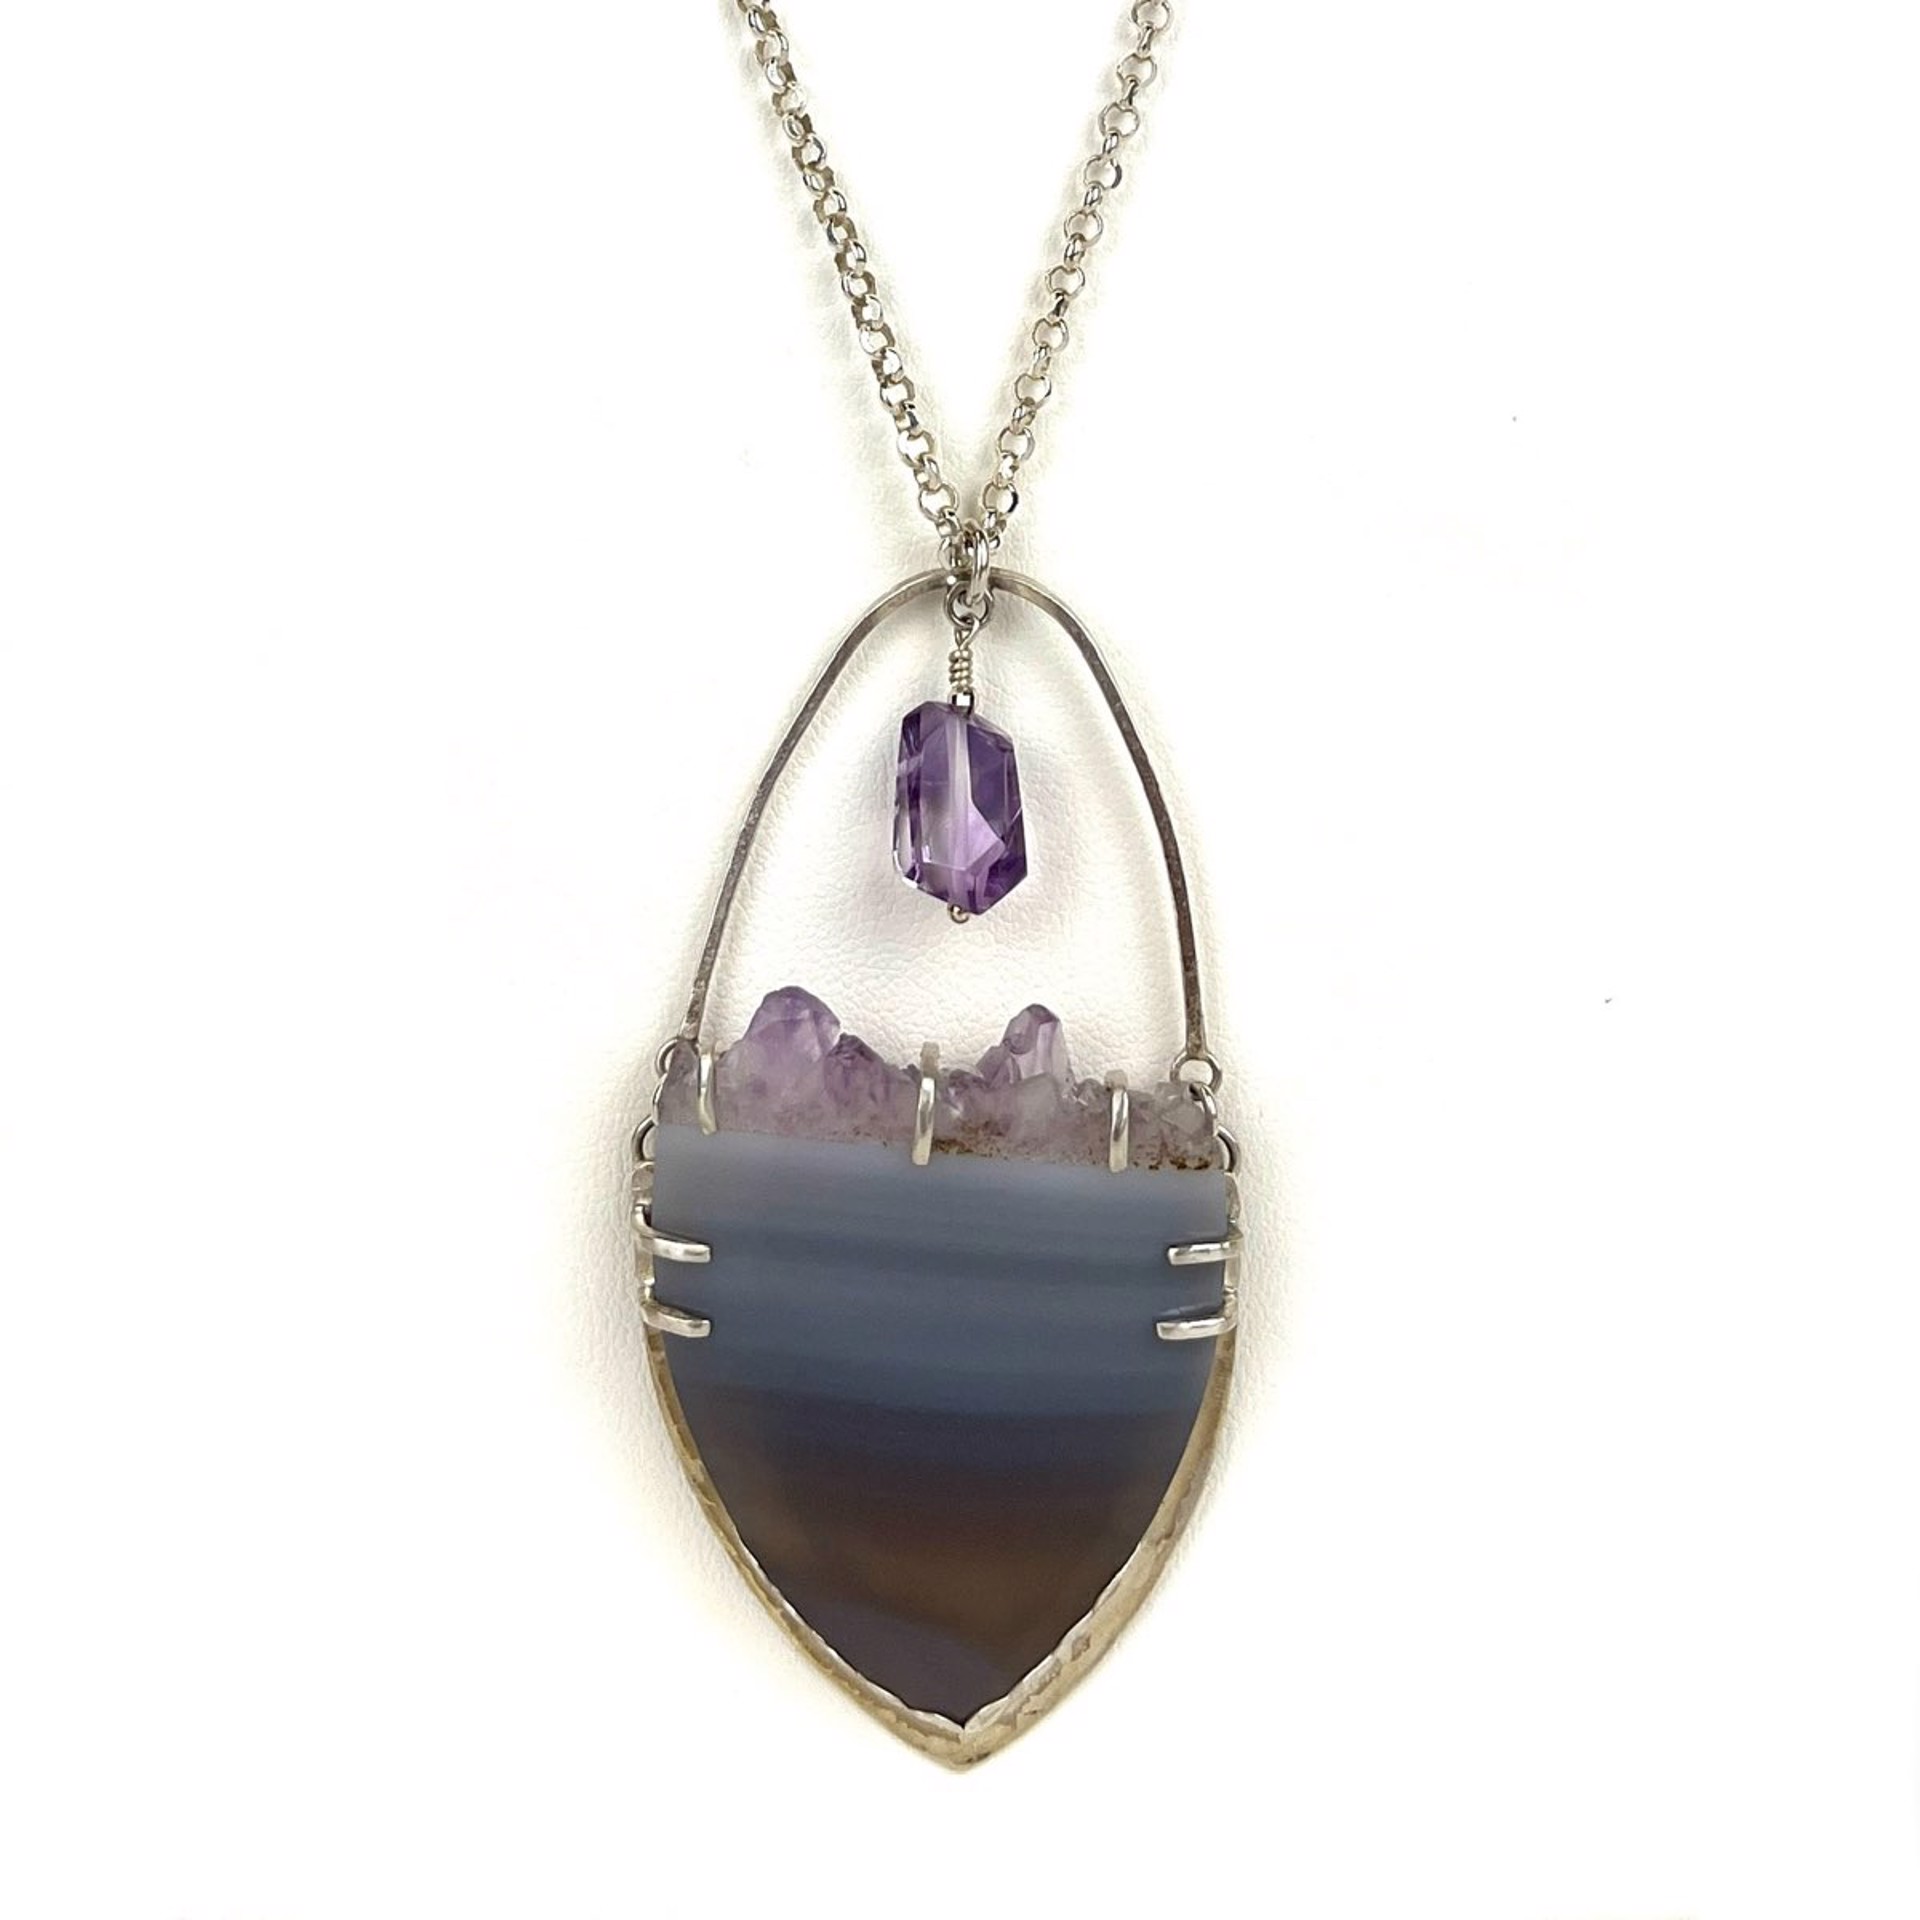 Agate & Amethyst Sterling Silver Necklace by Nola Smodic